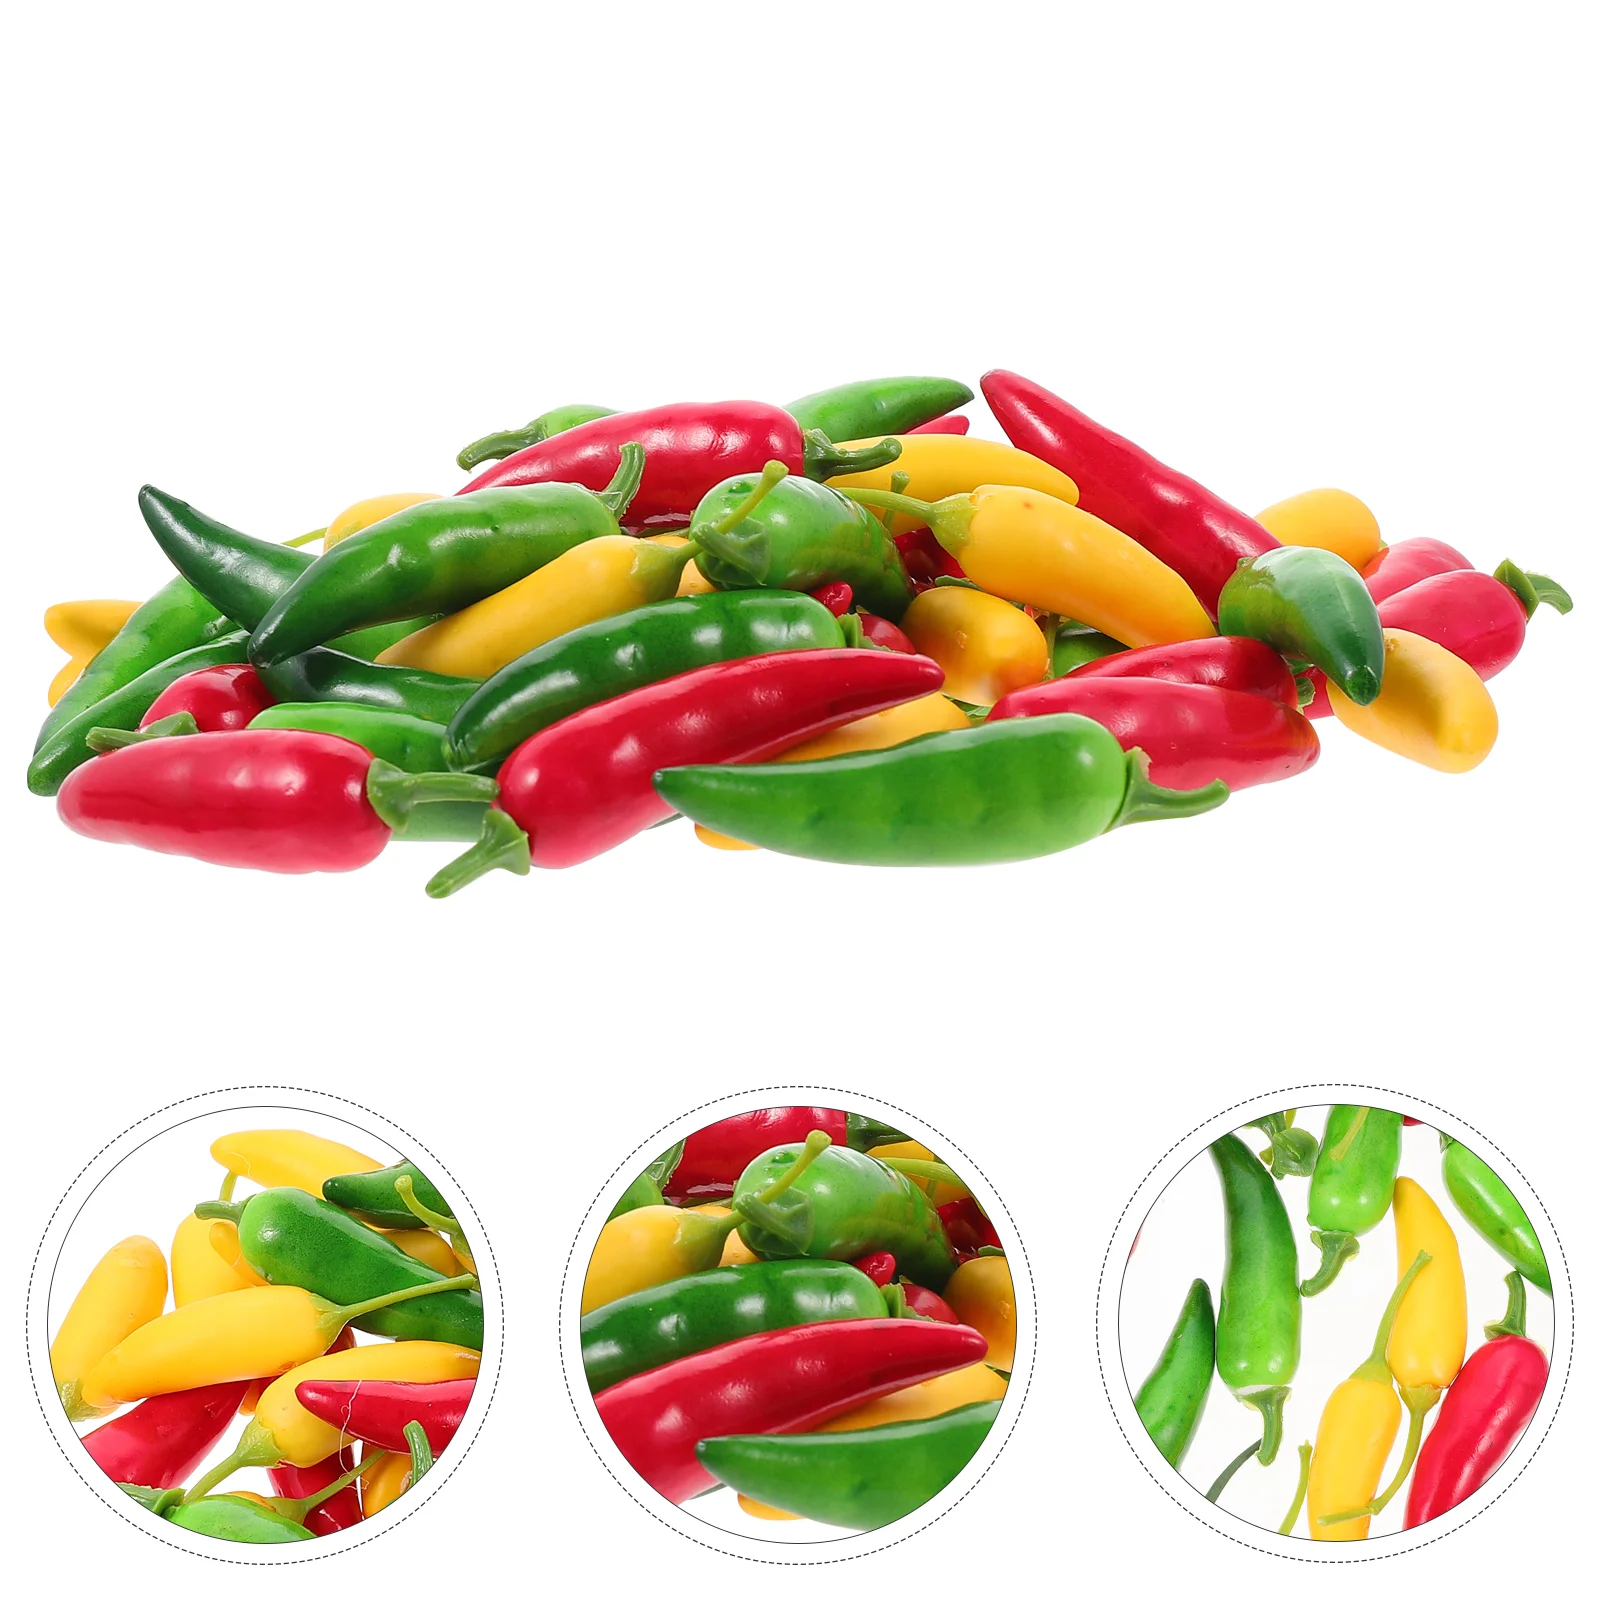 

60 Pcs Artificial Pepper Realistic Peppers Home Decoration Simulation Miniature Toys Fake Vegetable Small Vivid Models